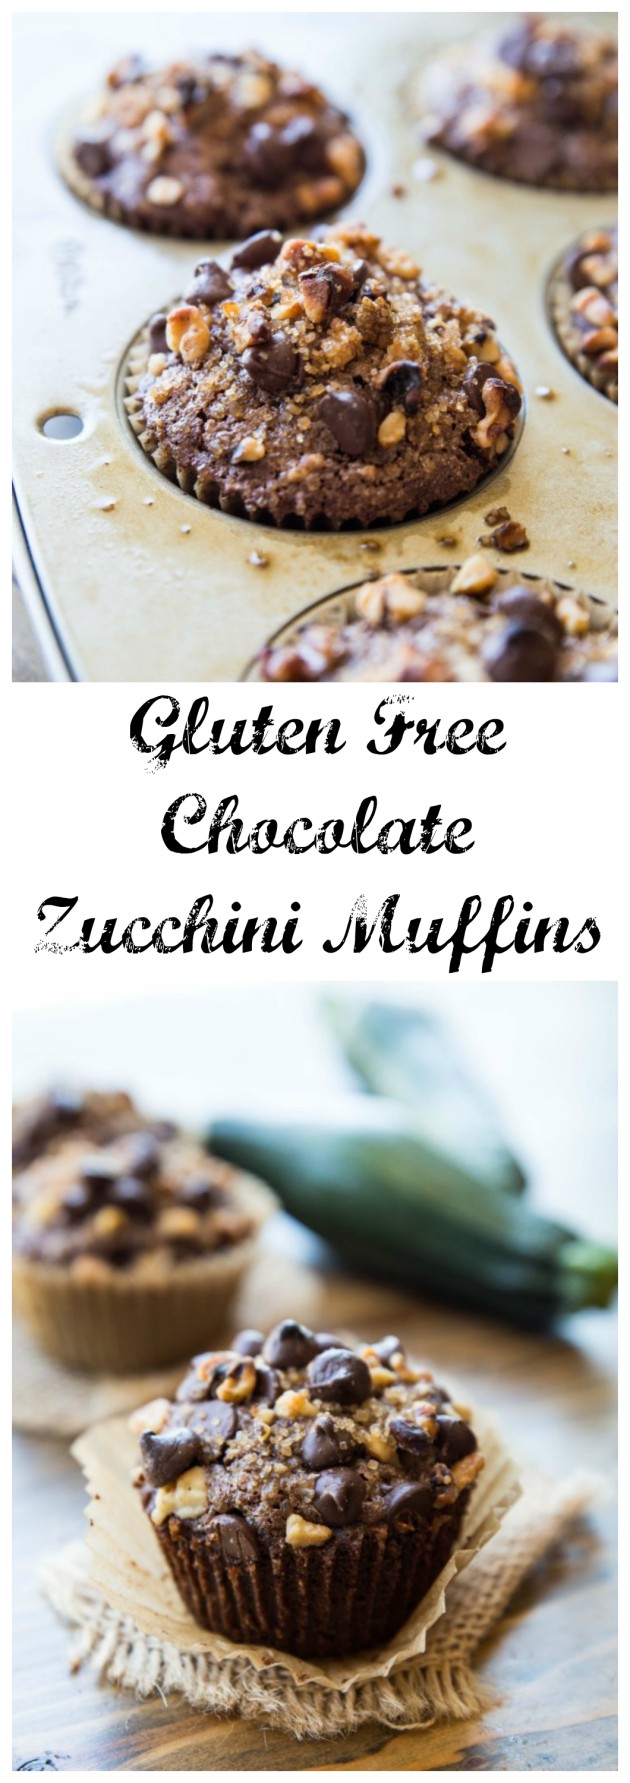 Gluten Free Chocolate Zucchini Muffins - soft, sweet, and decadent, made gluten free with homemade quinoa flour and almond flour!